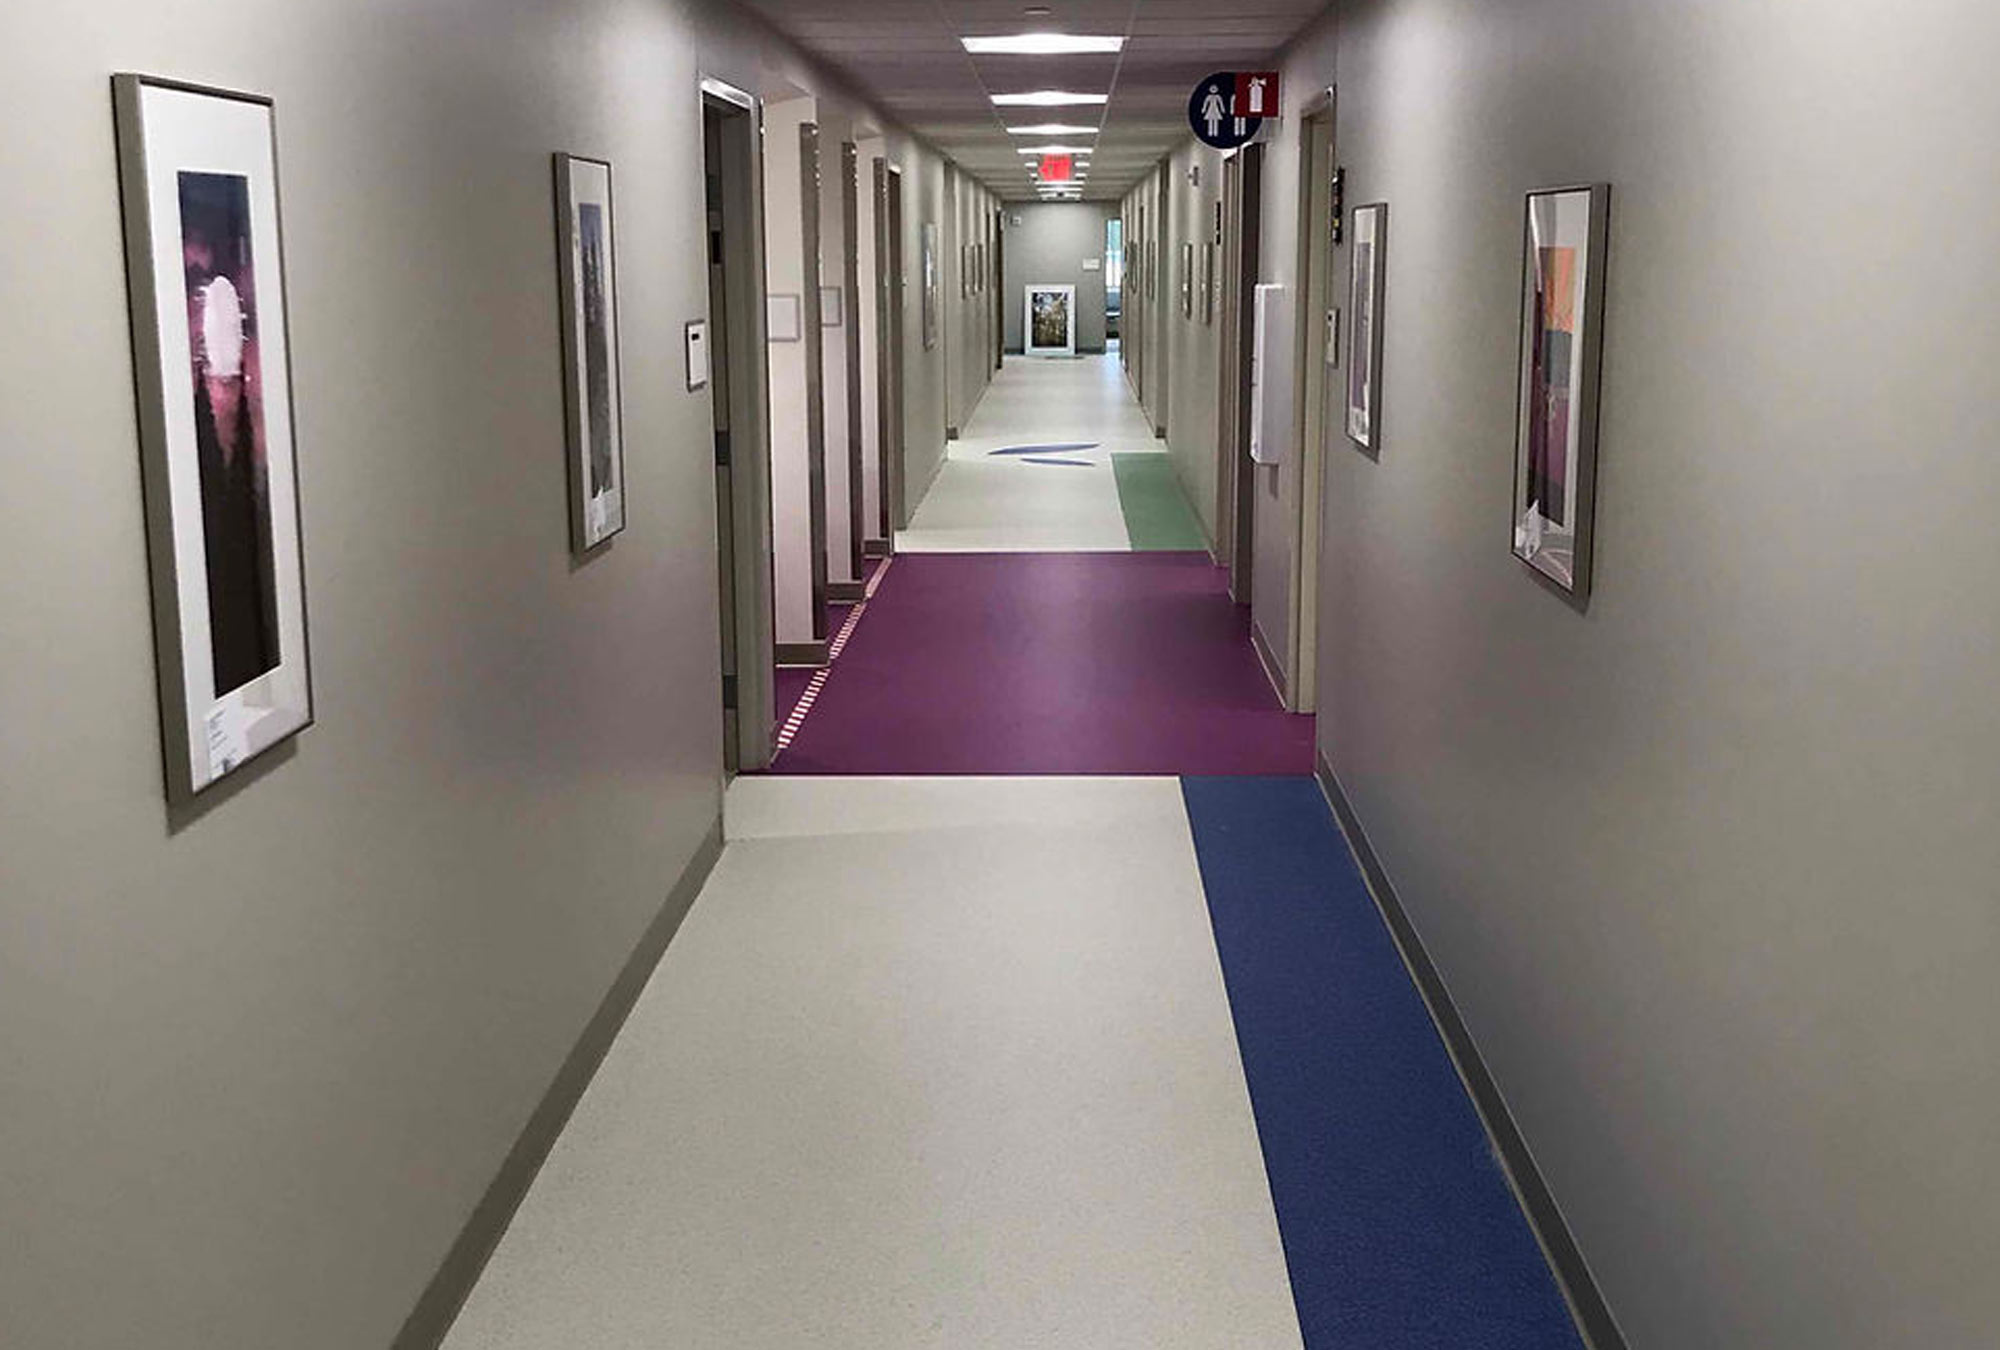 The Best Hospital Contractors Akron Children's Hospital Hallway - Portage County, Ohio by Fred Olivieri